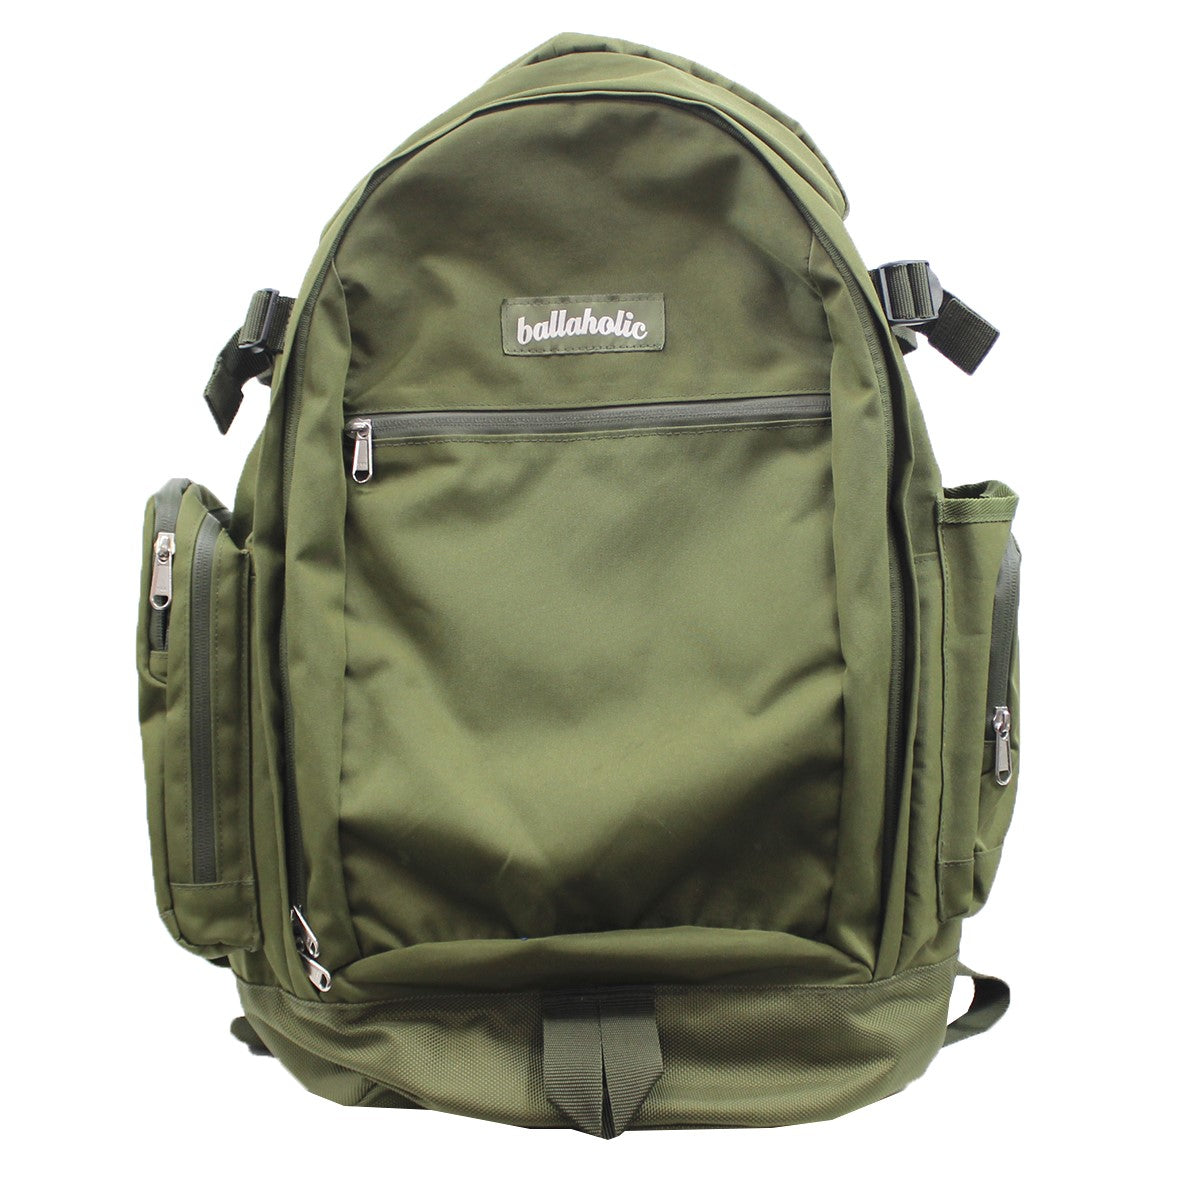 ballaholic(ボーラホリック) Ball On Journey Backpack バックパック